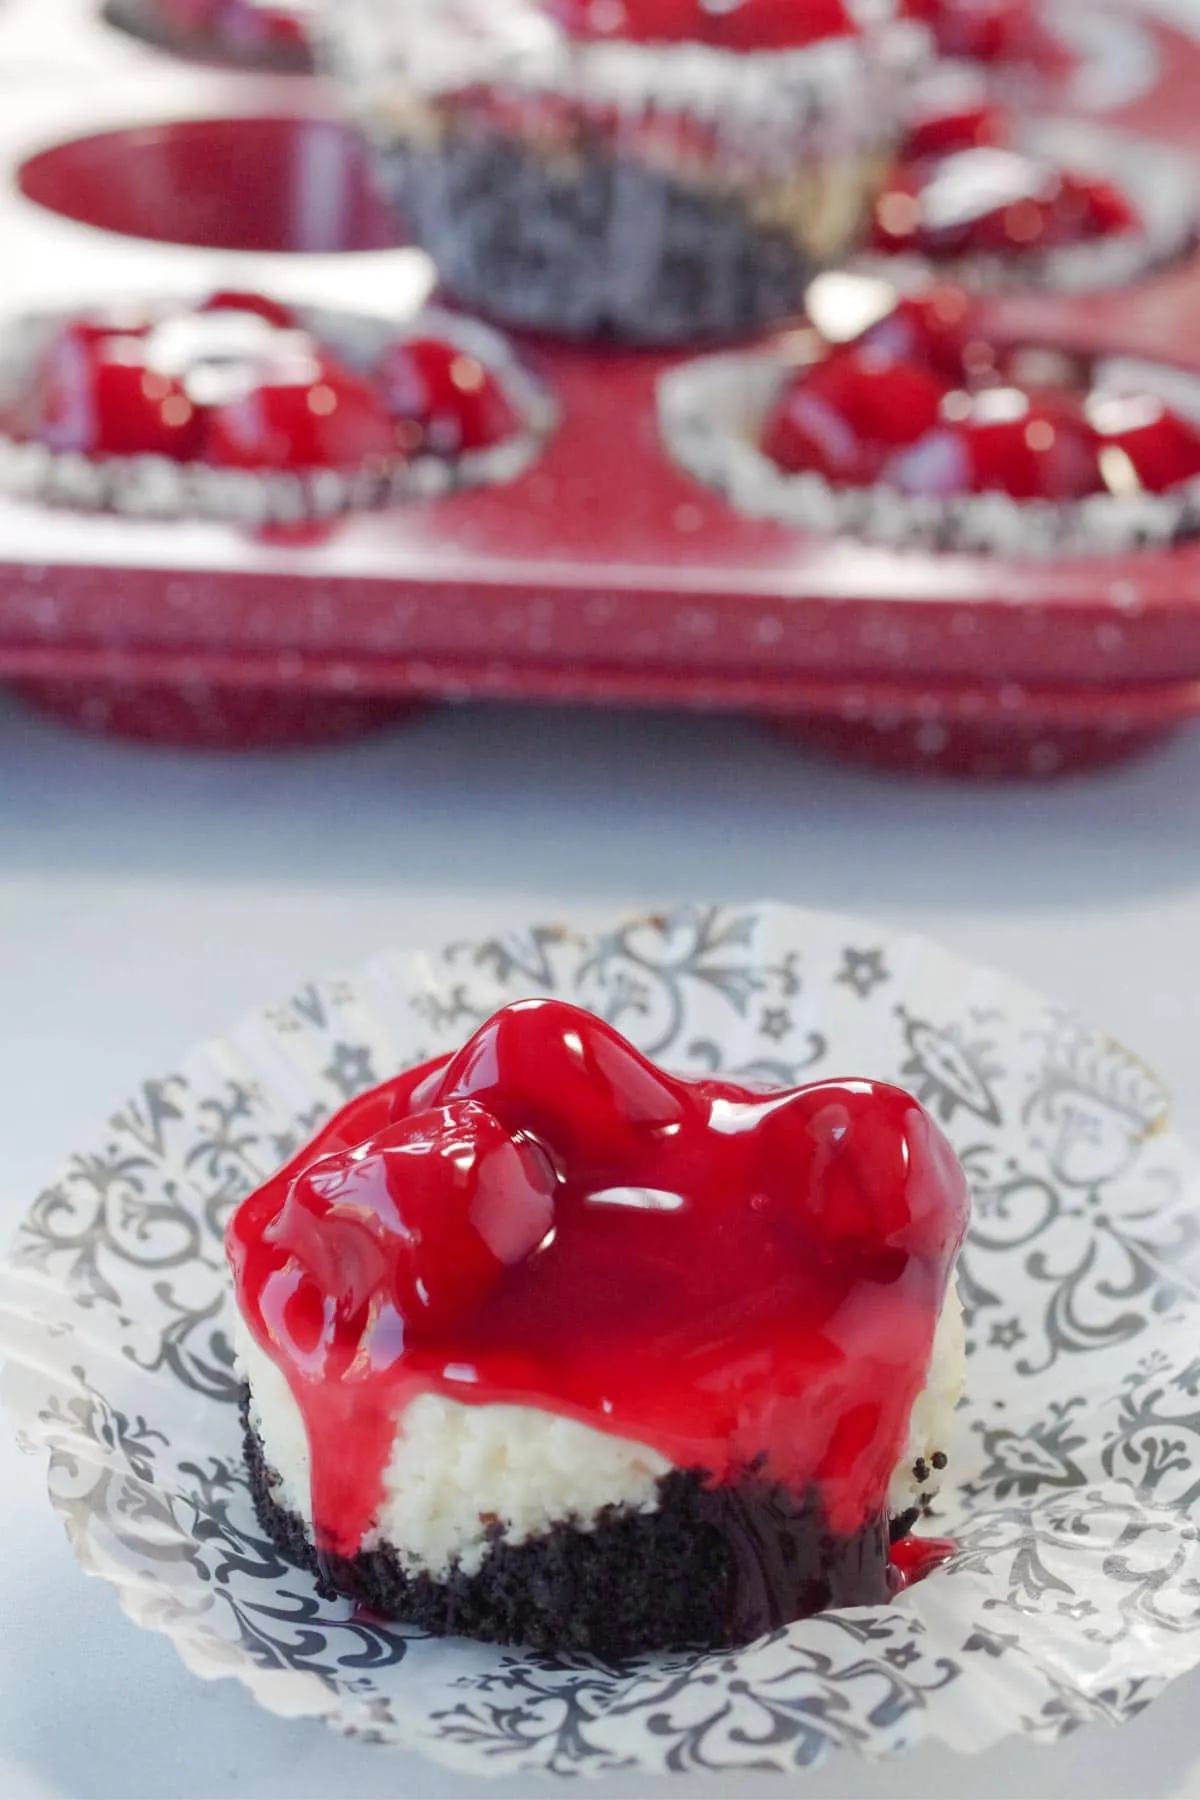 a mini cherry cheesecake on a damask print muffin wrapper, with a red speckled muffin tin ofmini cherry cheesecakes in the background